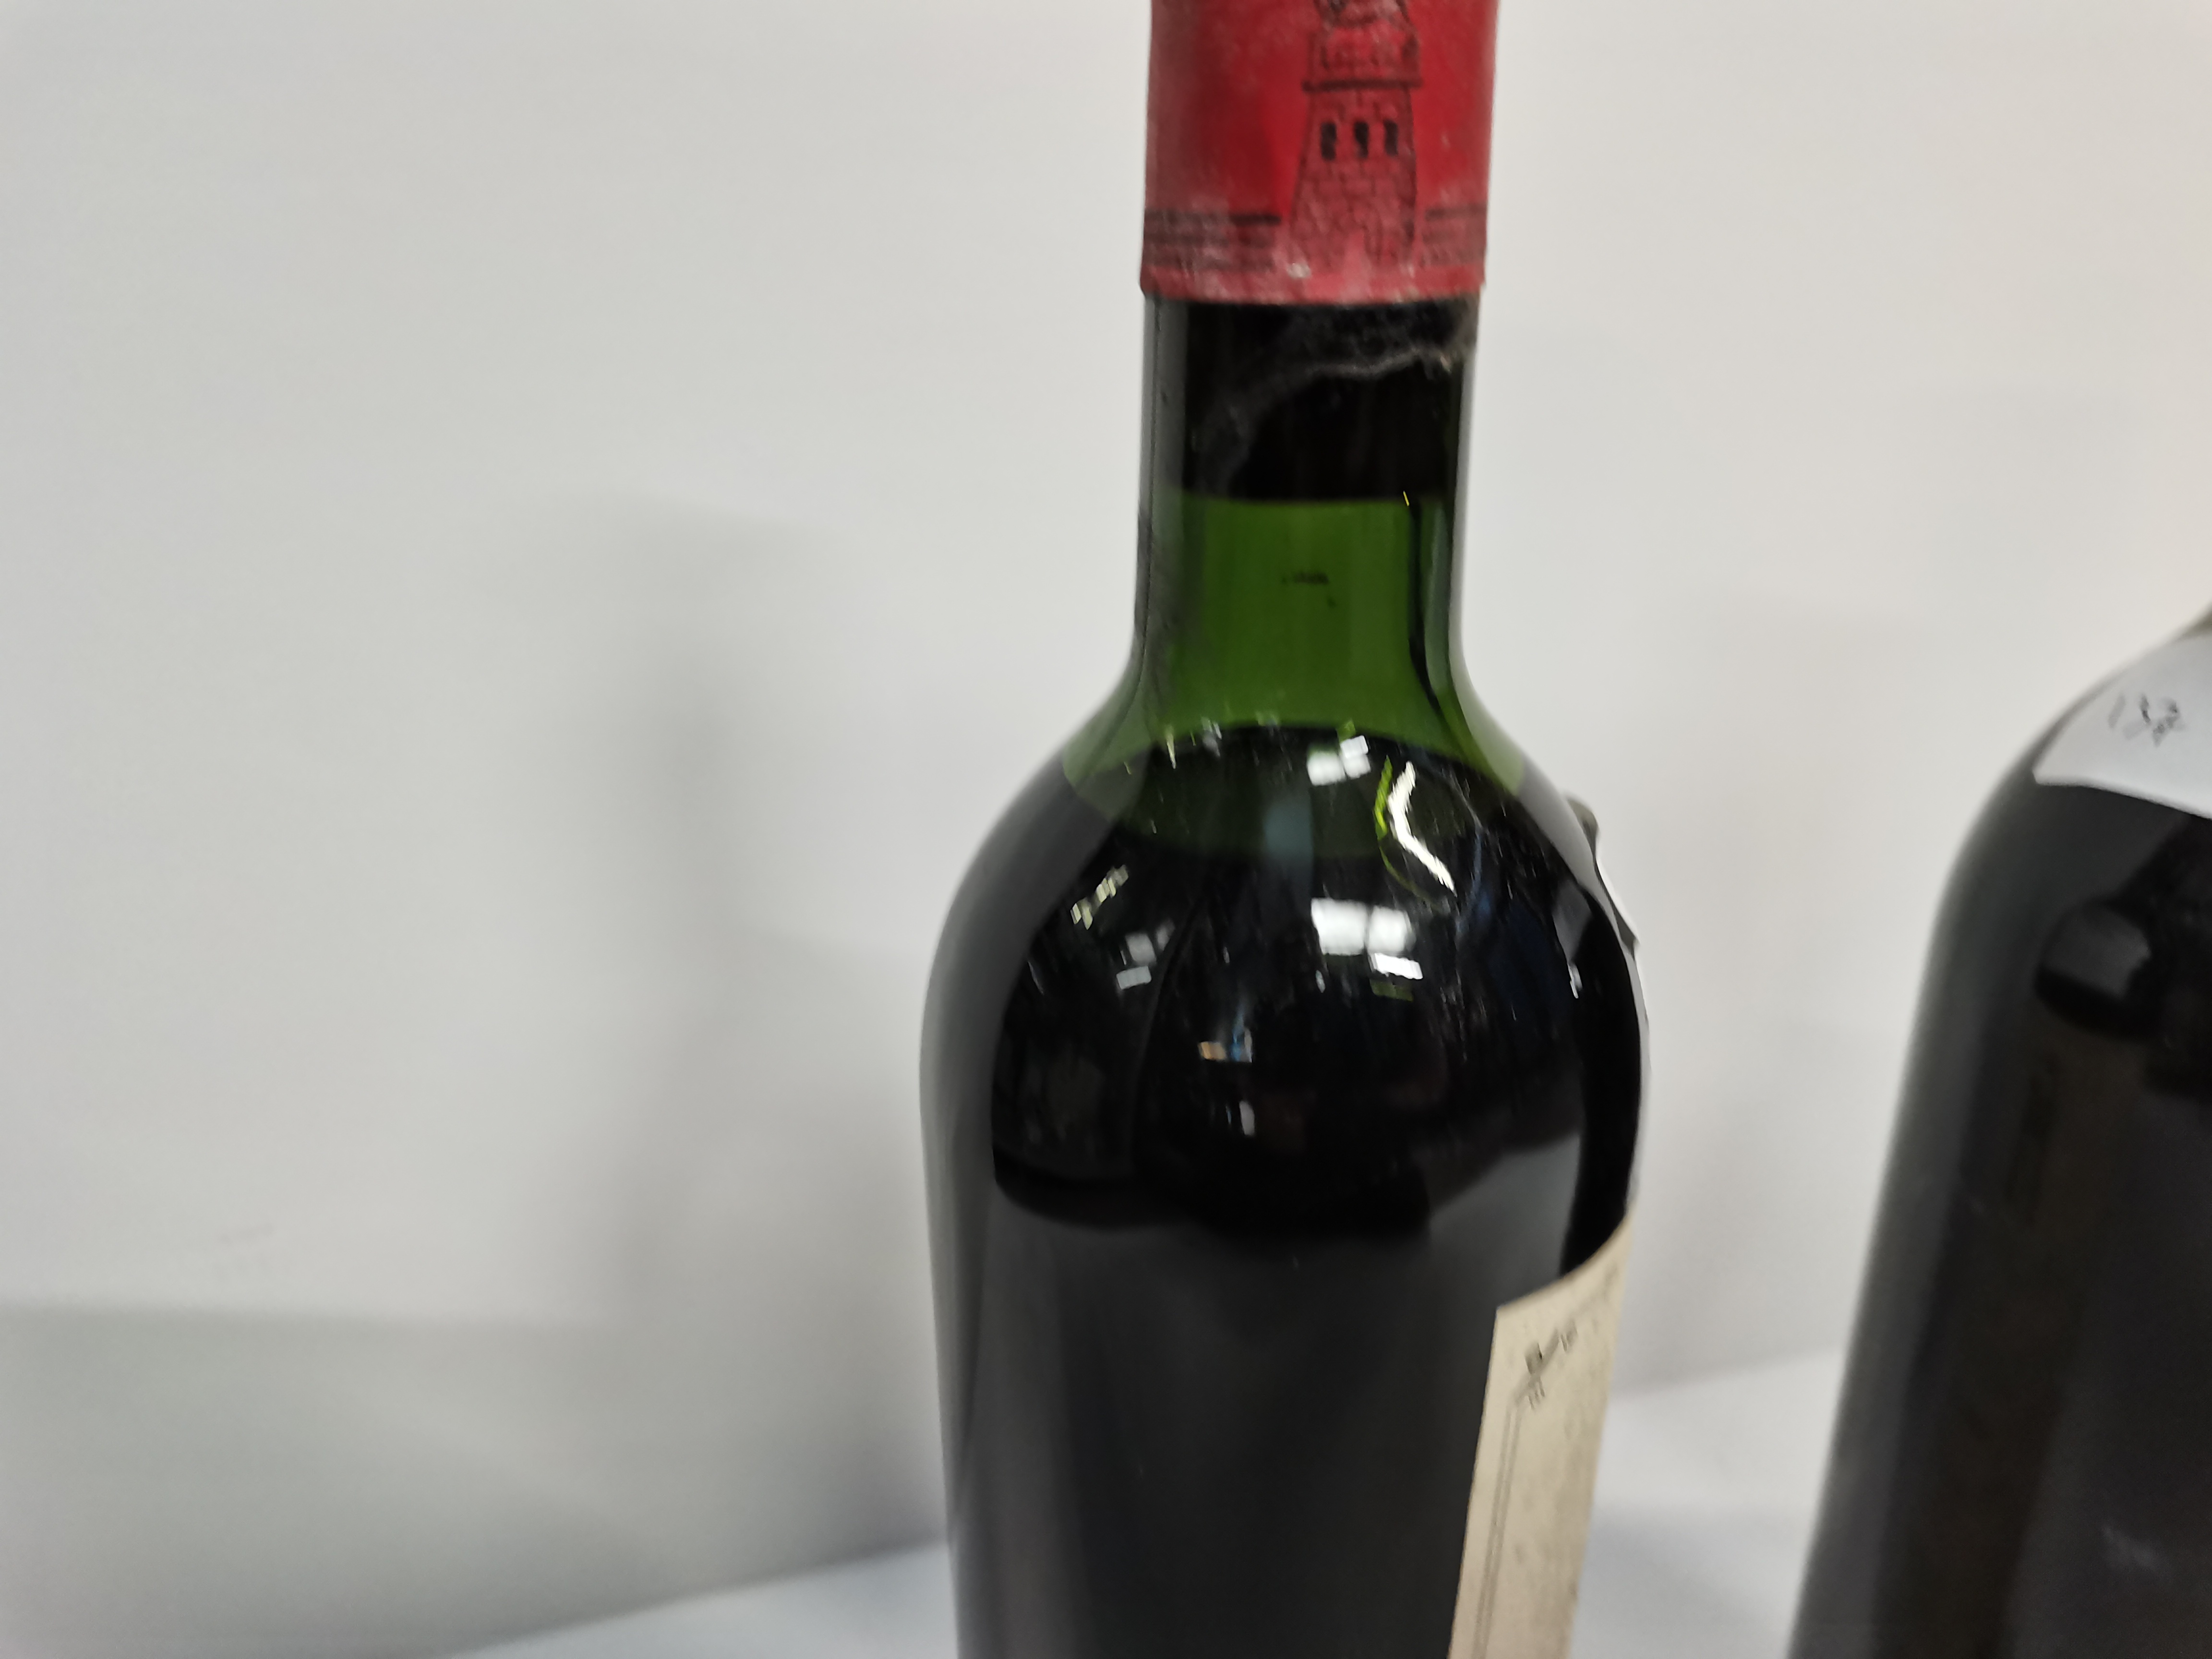 x2 bottles of Grand vin de Chateau Latour 1958 and a bottle of Dows port - Image 5 of 12